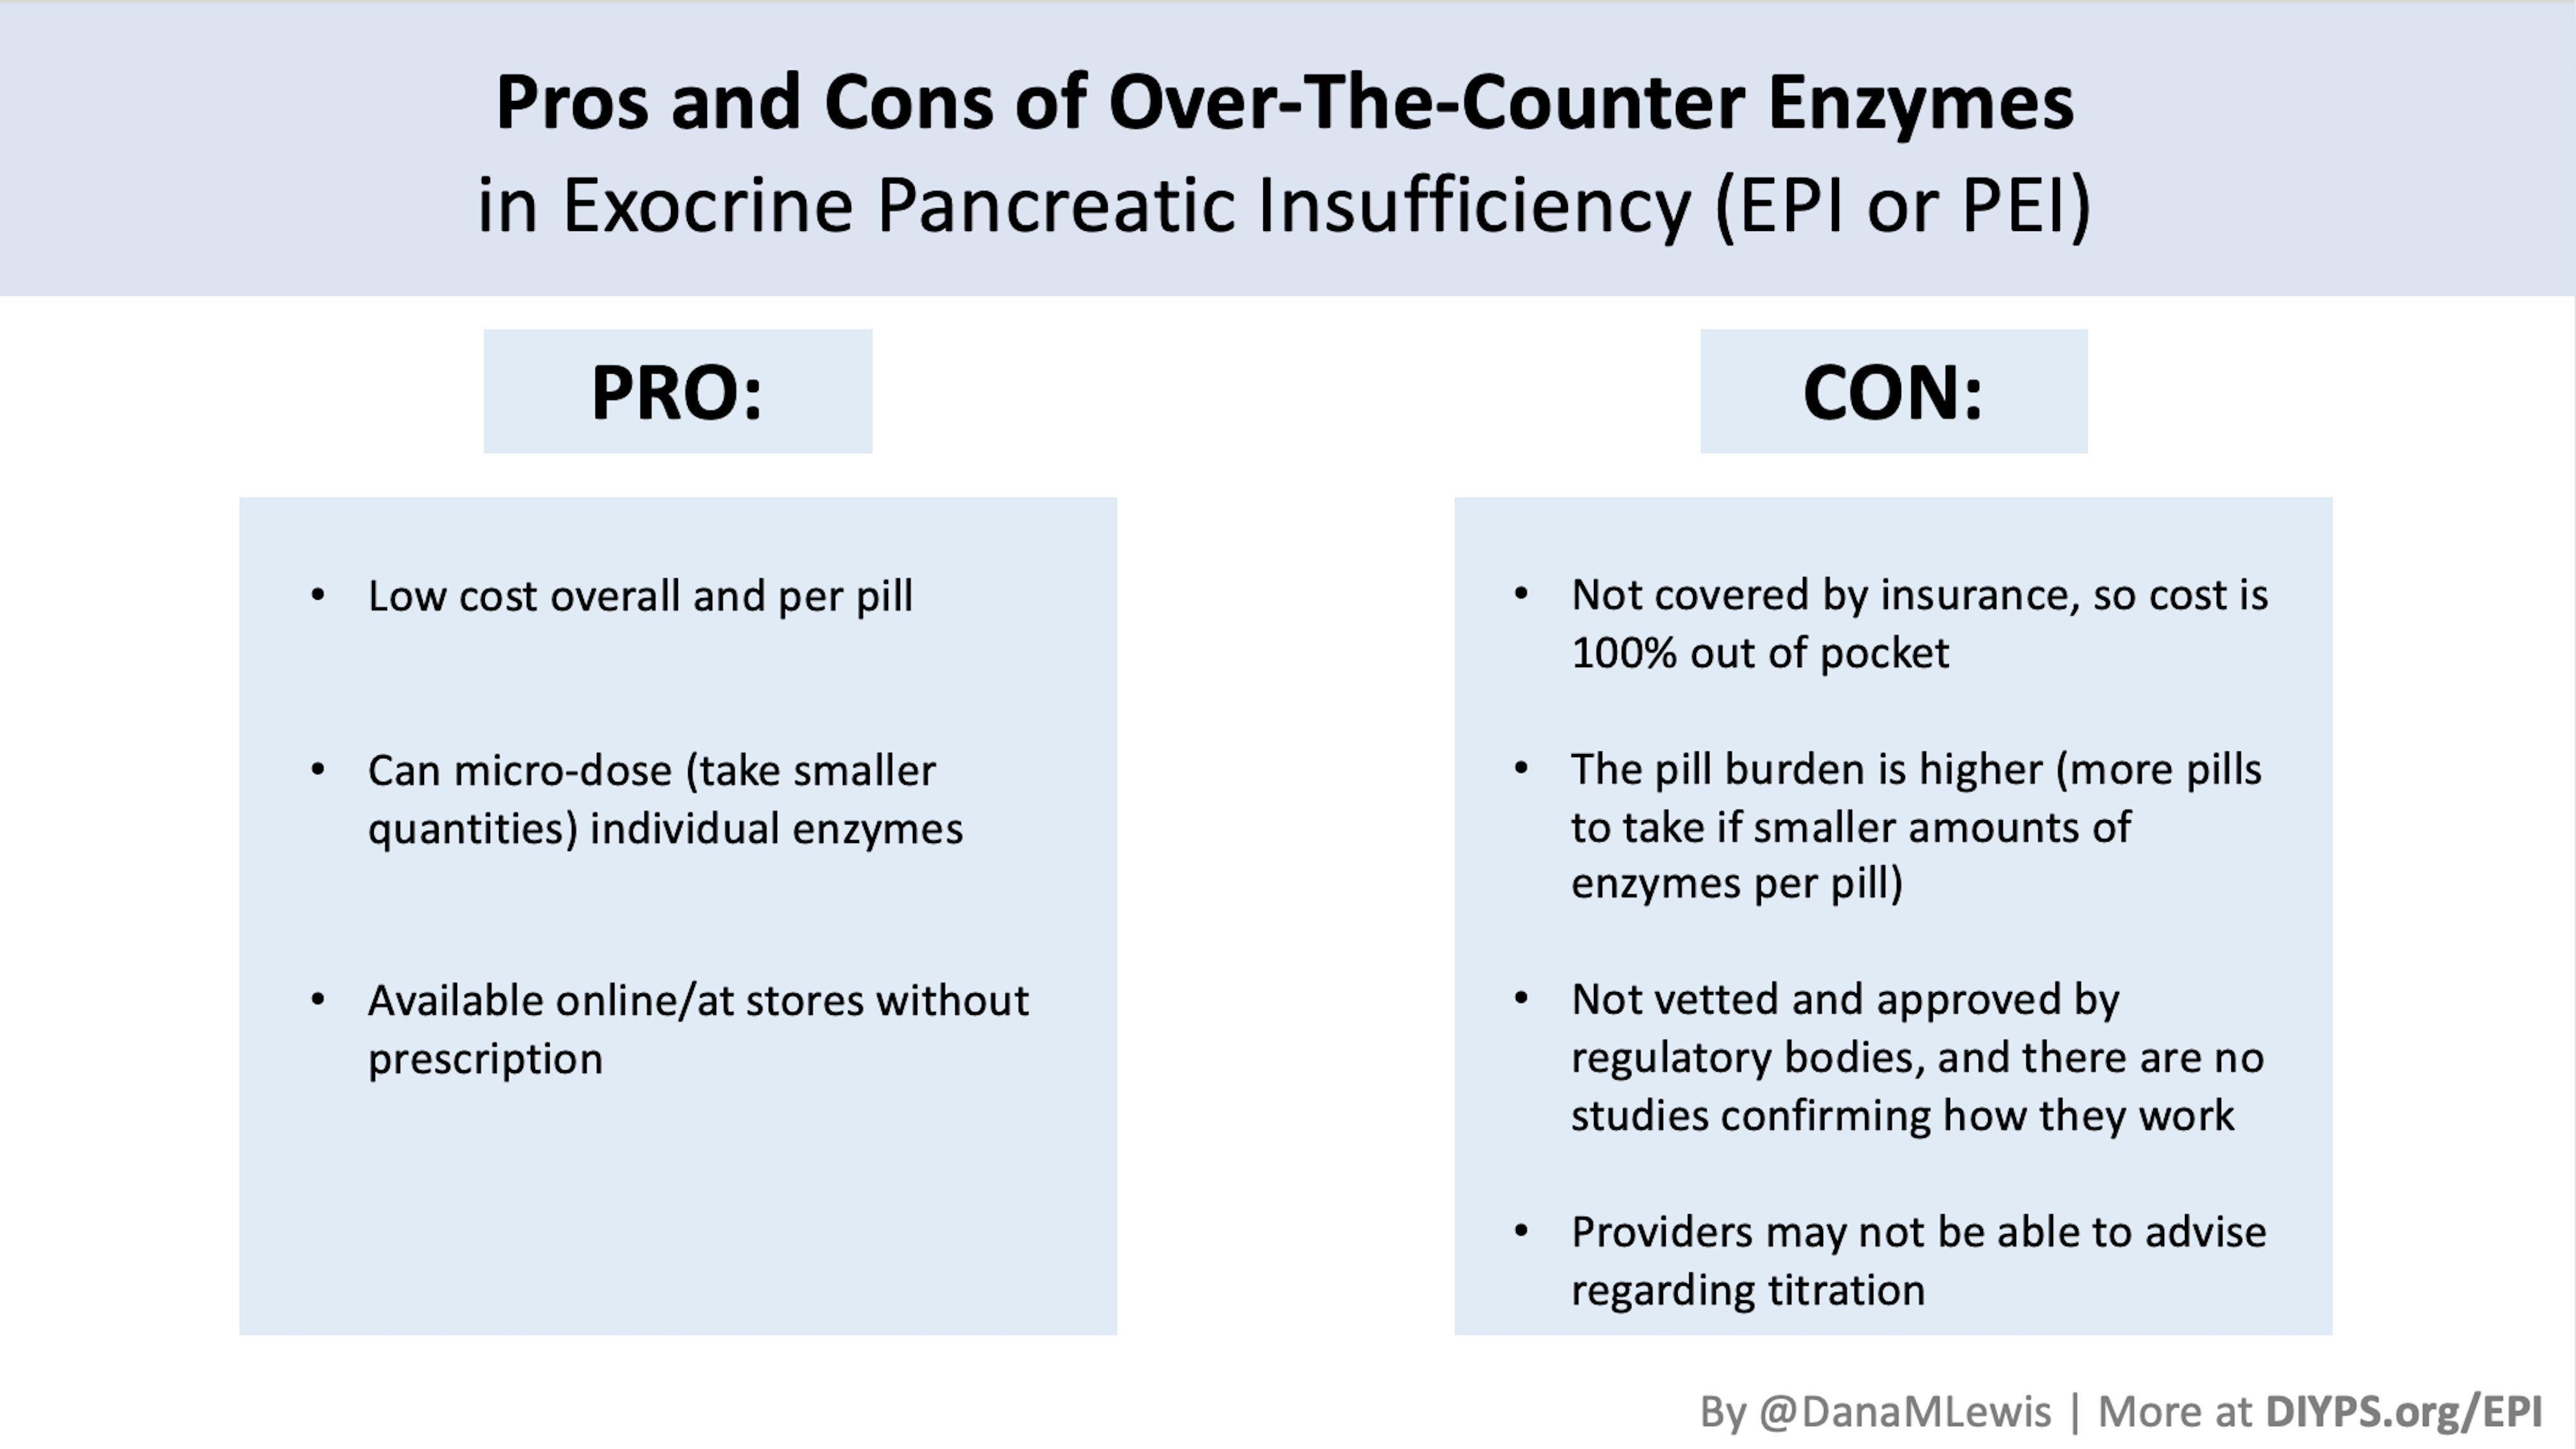 A pro-con list for over the counter (OTC) enzymes for EPI. Pros include: lower cost overall and per pill; that you can take smaller quantities of individual enzymes; and you can buy them without a prescription. Cons include: it's not covered by insurance so cost is out of pocket; you have to take more pills with smaller amounts of enzymes; it's not regulatory approved so othere are no studies on efficacy; and providers may not be able to advise for titration.